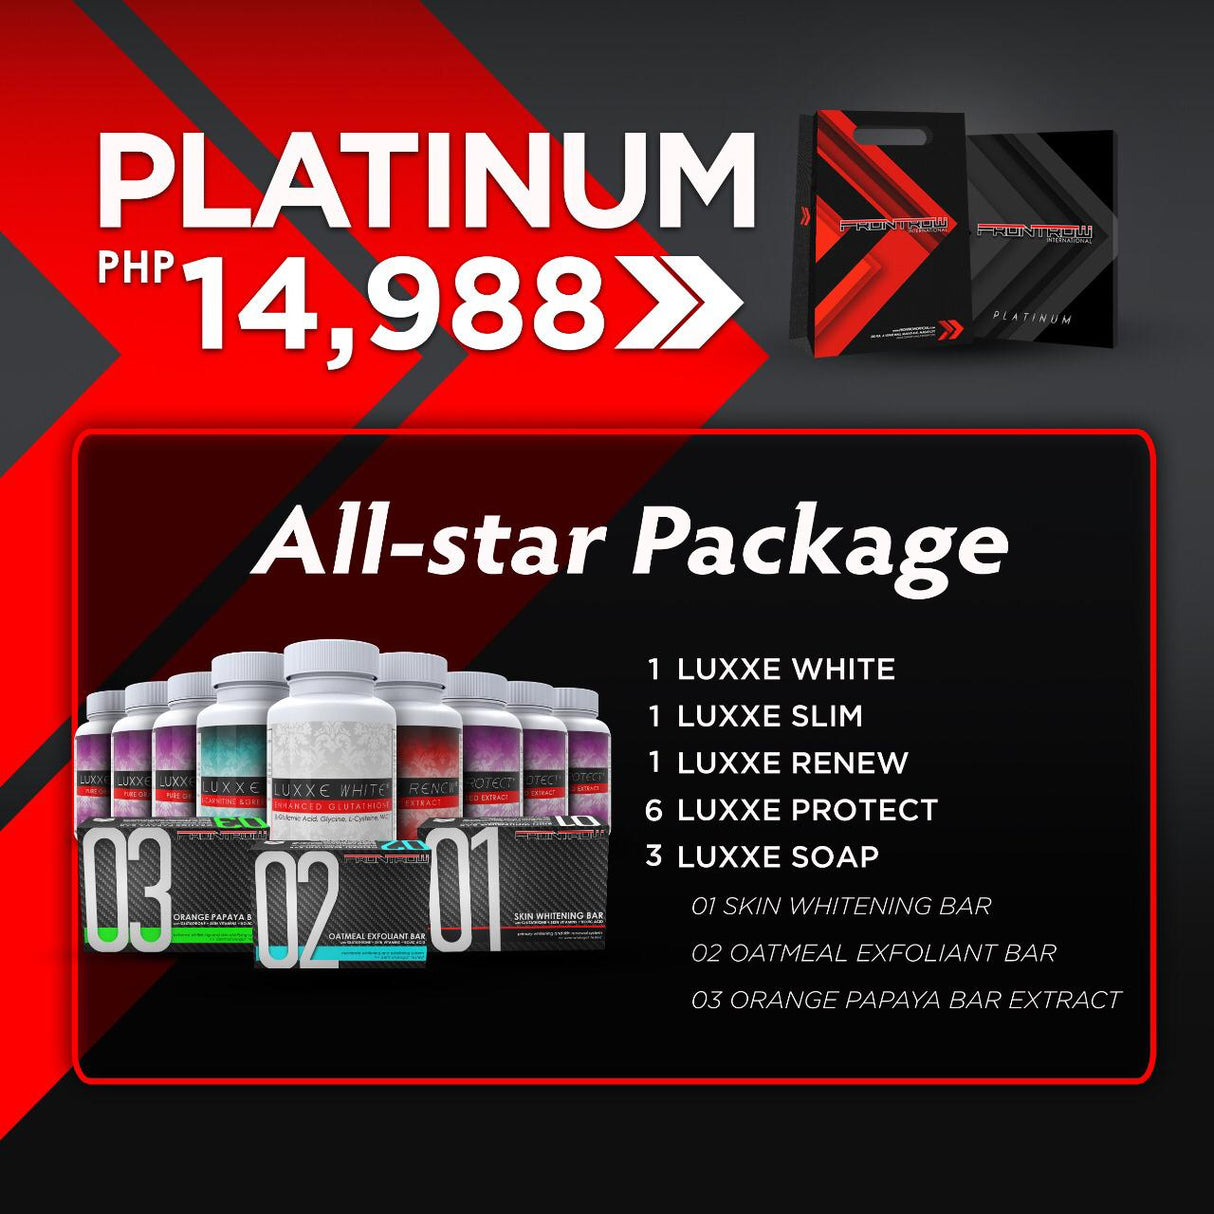 Platinum All-star Package